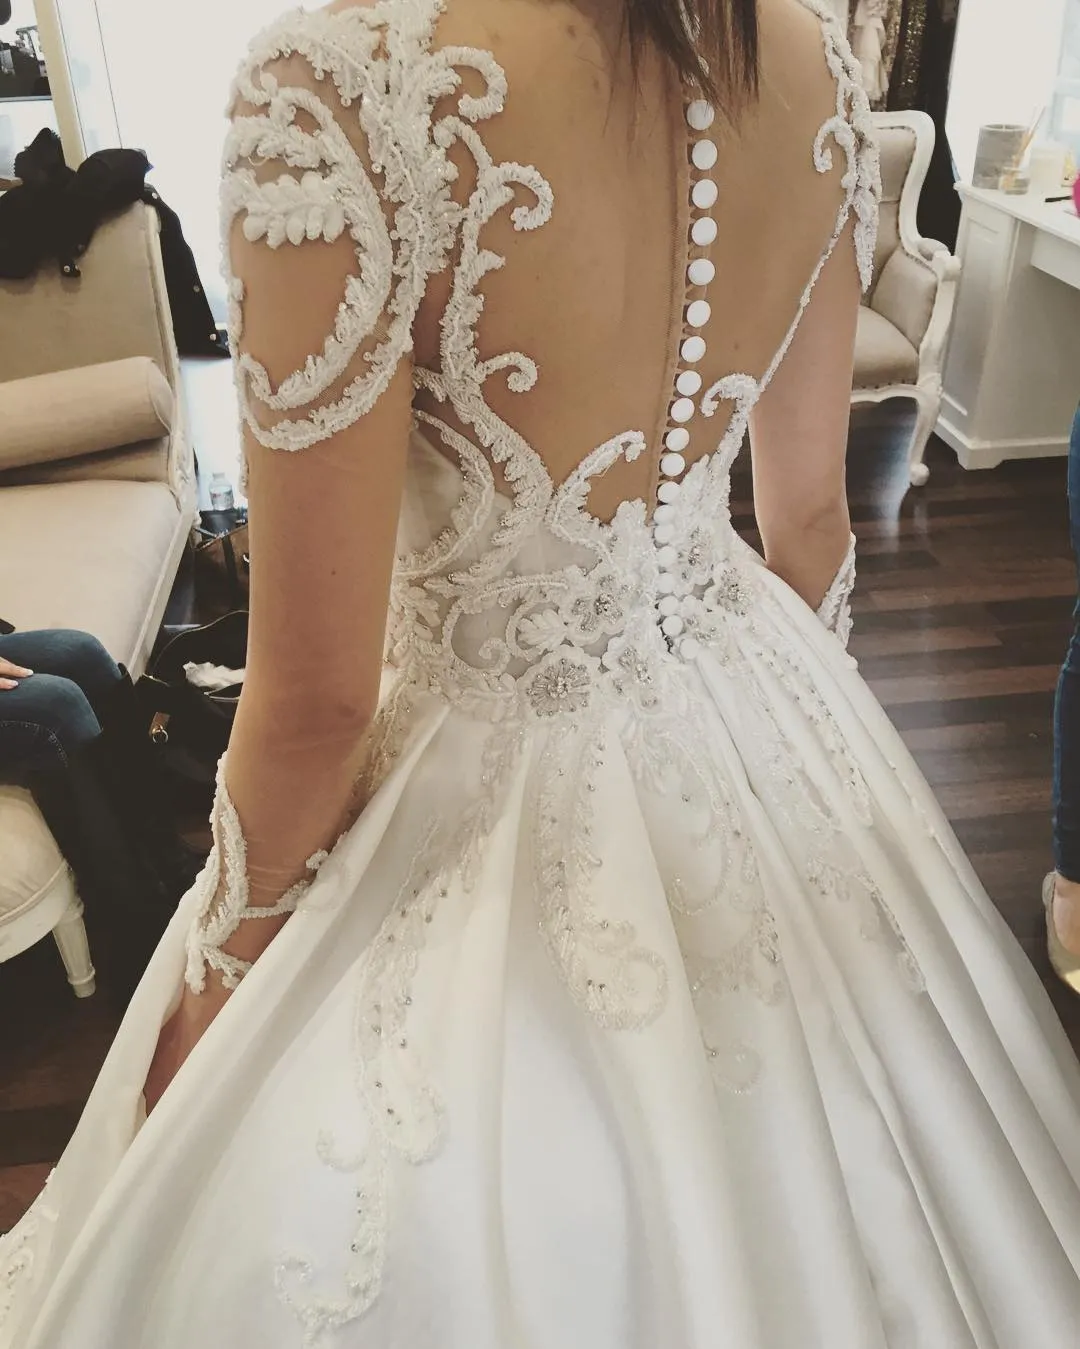 Long Sleeve 2017 Wedding Dresses Lace Applique Crystal Sheer Neck Bridal Gowns Cathedral Train Satin Plus Size Wedding Dress